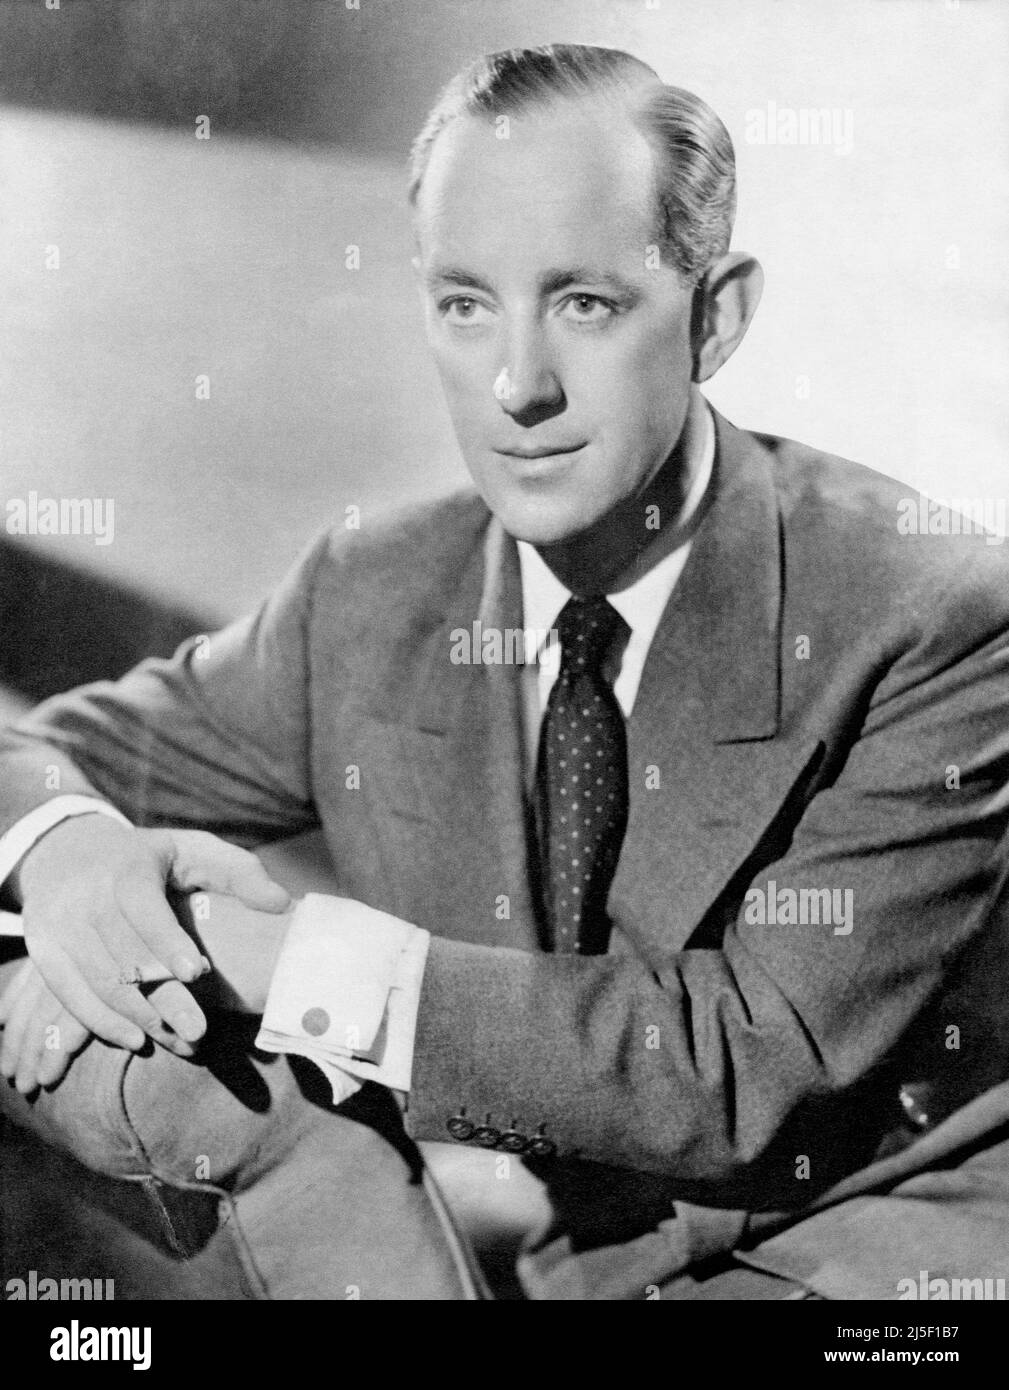 1951 publicity photo of actor and movie star Alec Guinness. Stock Photo